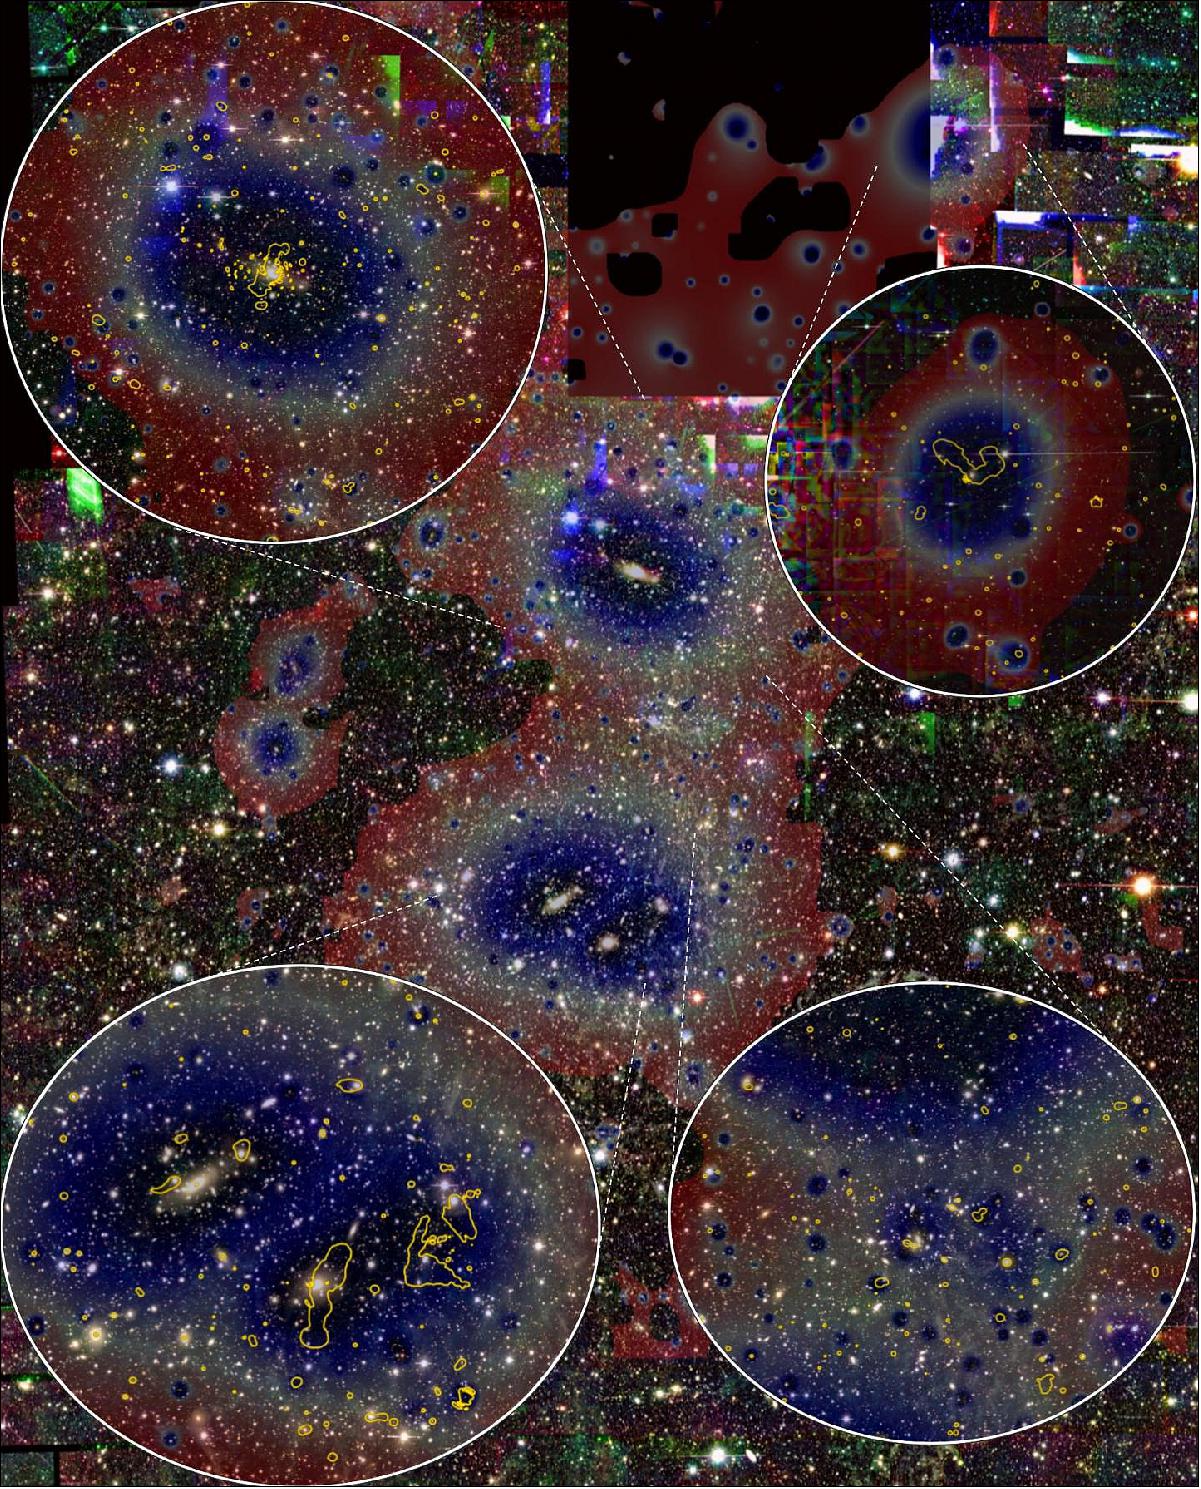 Figure 43: Optical image of the Abell 3391/95 system taken with the DECam camera. Superimposed are the eROSITA image (darker = higher gas density) and radio contours (yellow) of the ASKAP telescope (image credit: © Reiprich et al., Astronomy & Astrophysics)